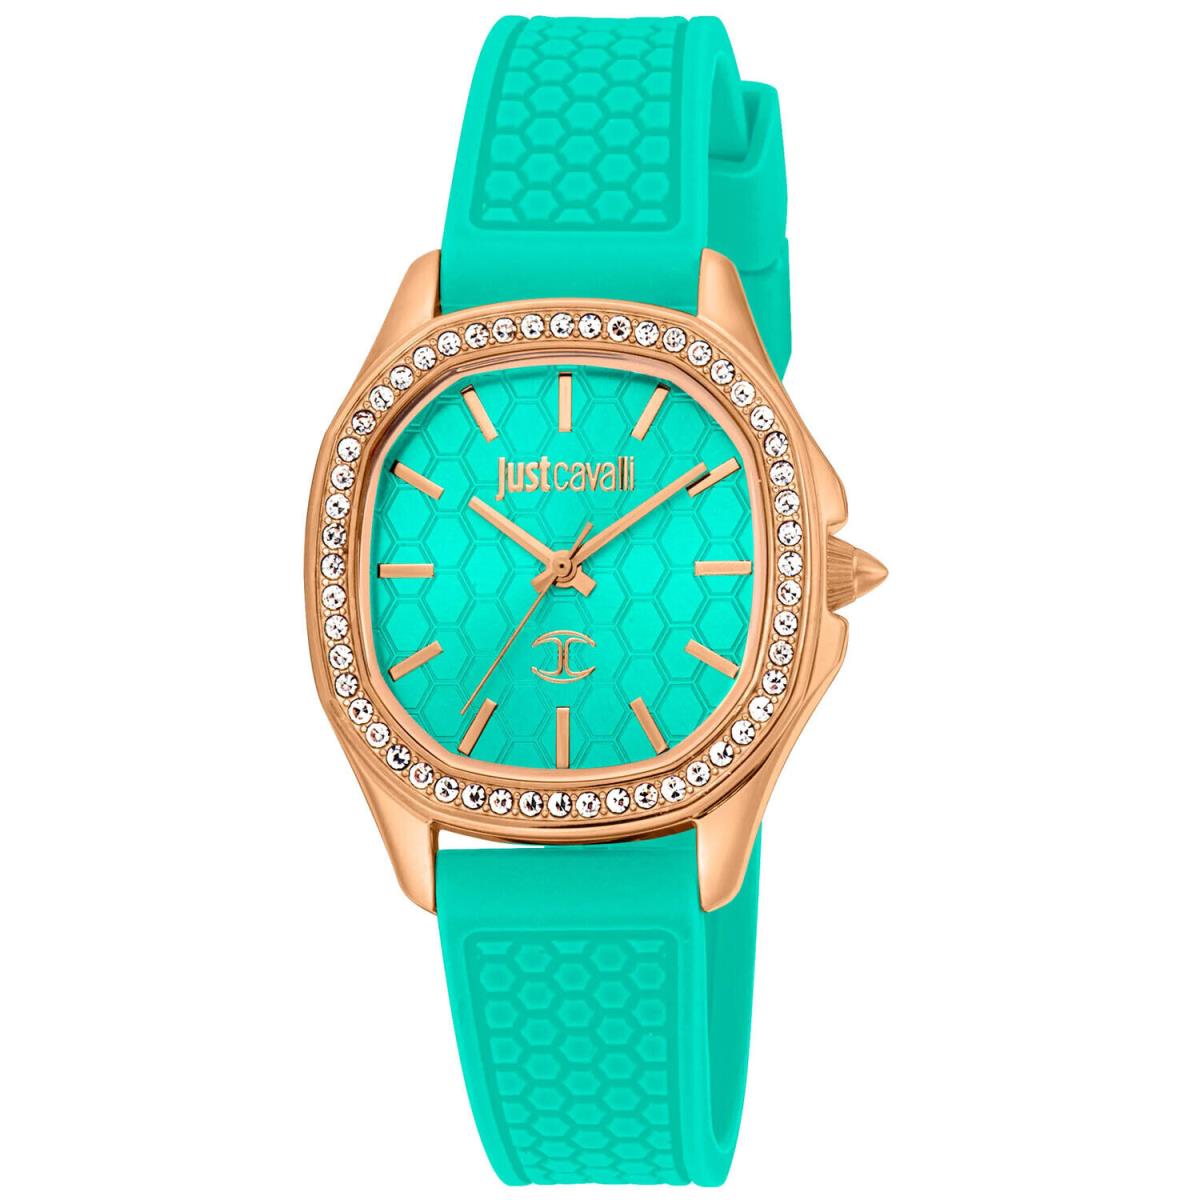 Just Cavalli Women`s Glam Chic Turquoise Dial Watch - JC1L263P0035